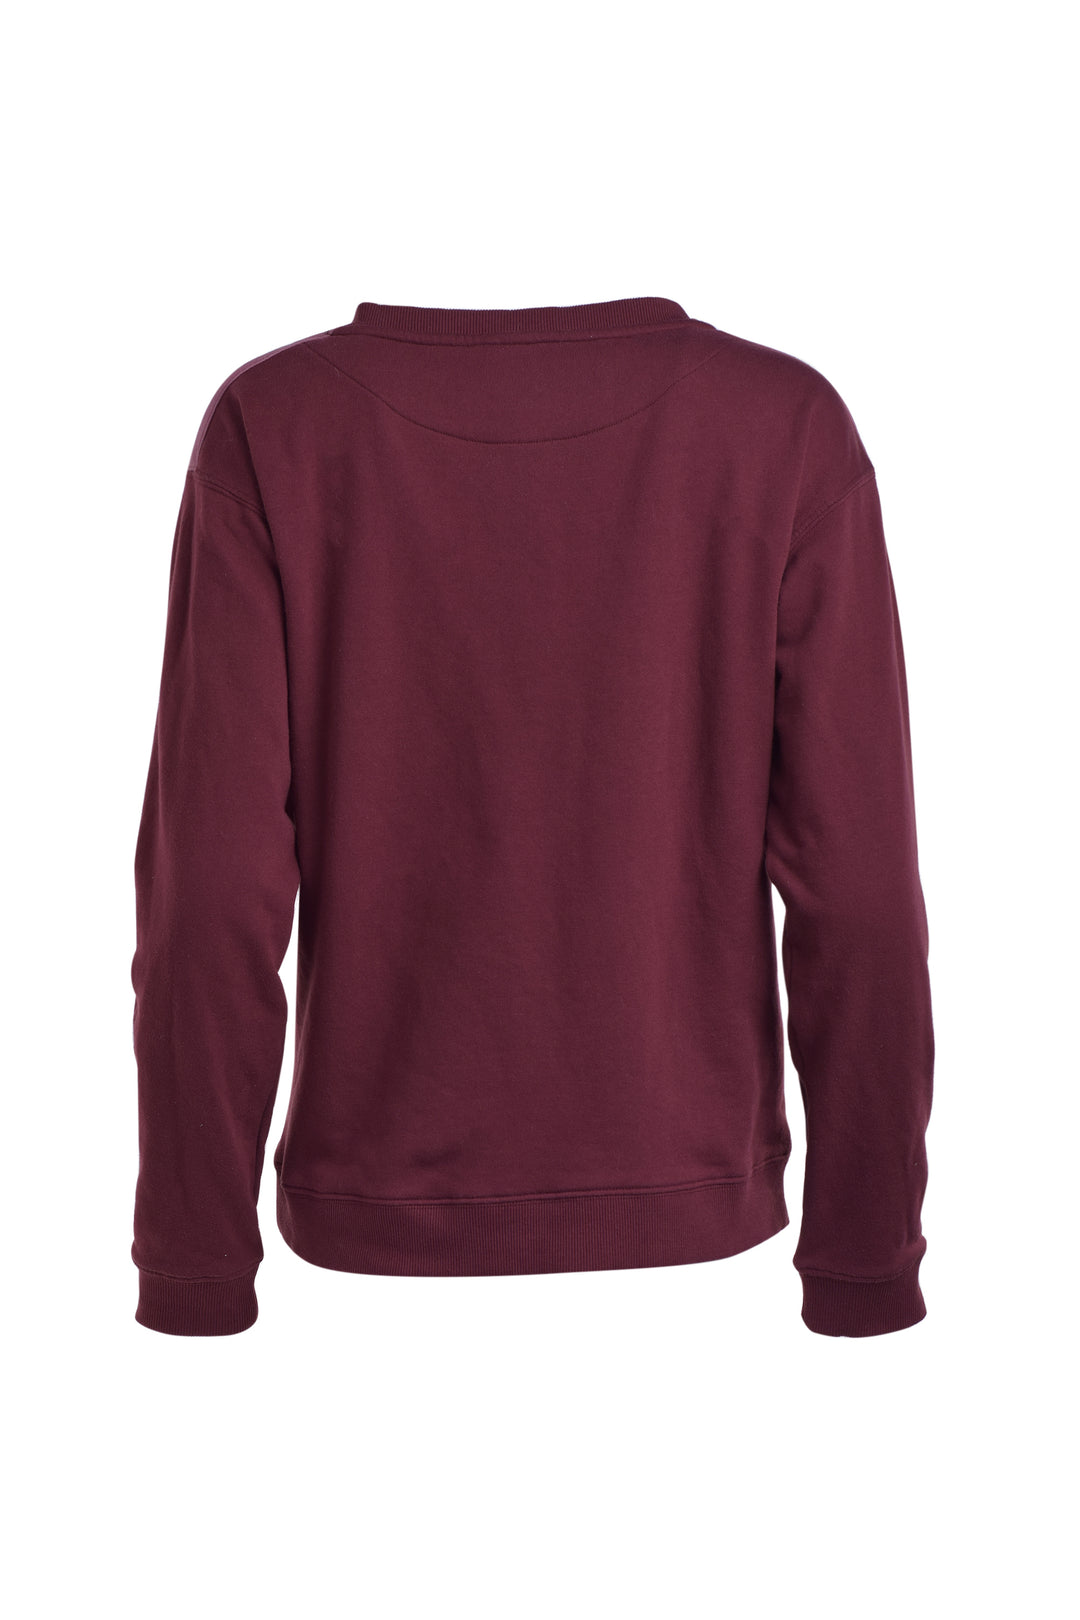 Semi-plunging v-neck sweater in French cotton